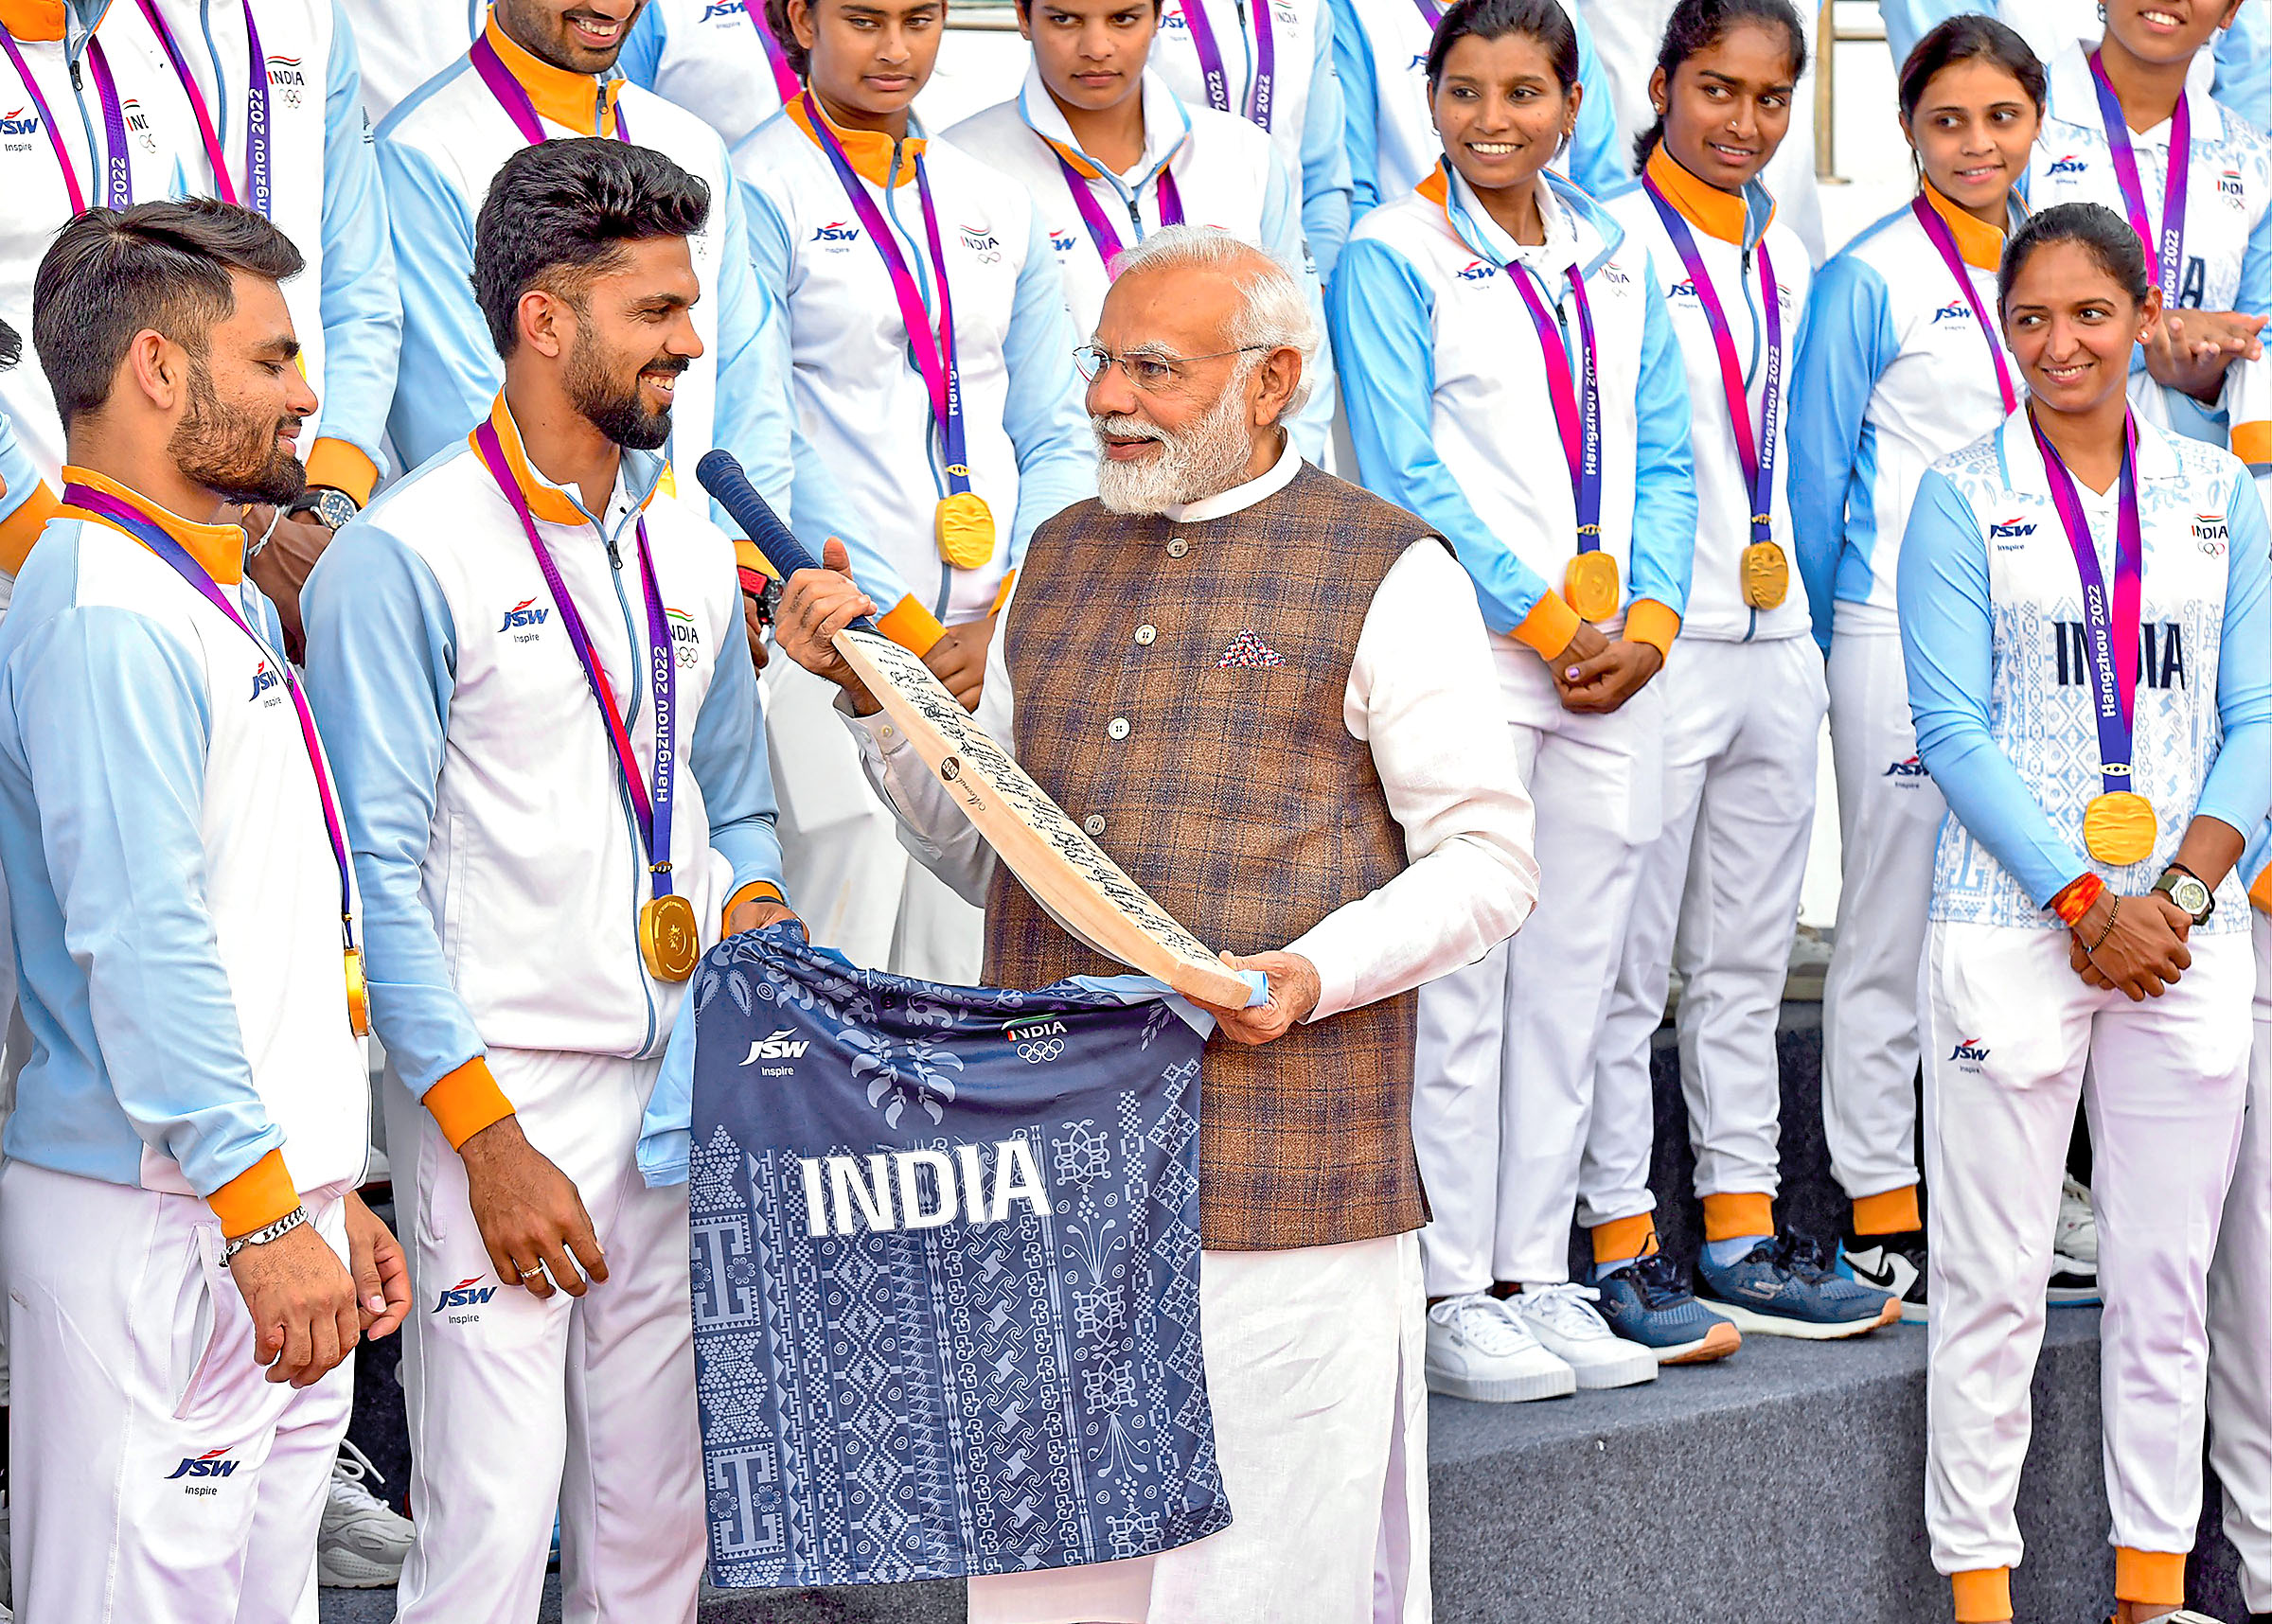 Prime Minister Narendra Modi being presented a bat and India ti-shirt as he meets with gold medal winning cricket teams and other Asian Games medal winners.